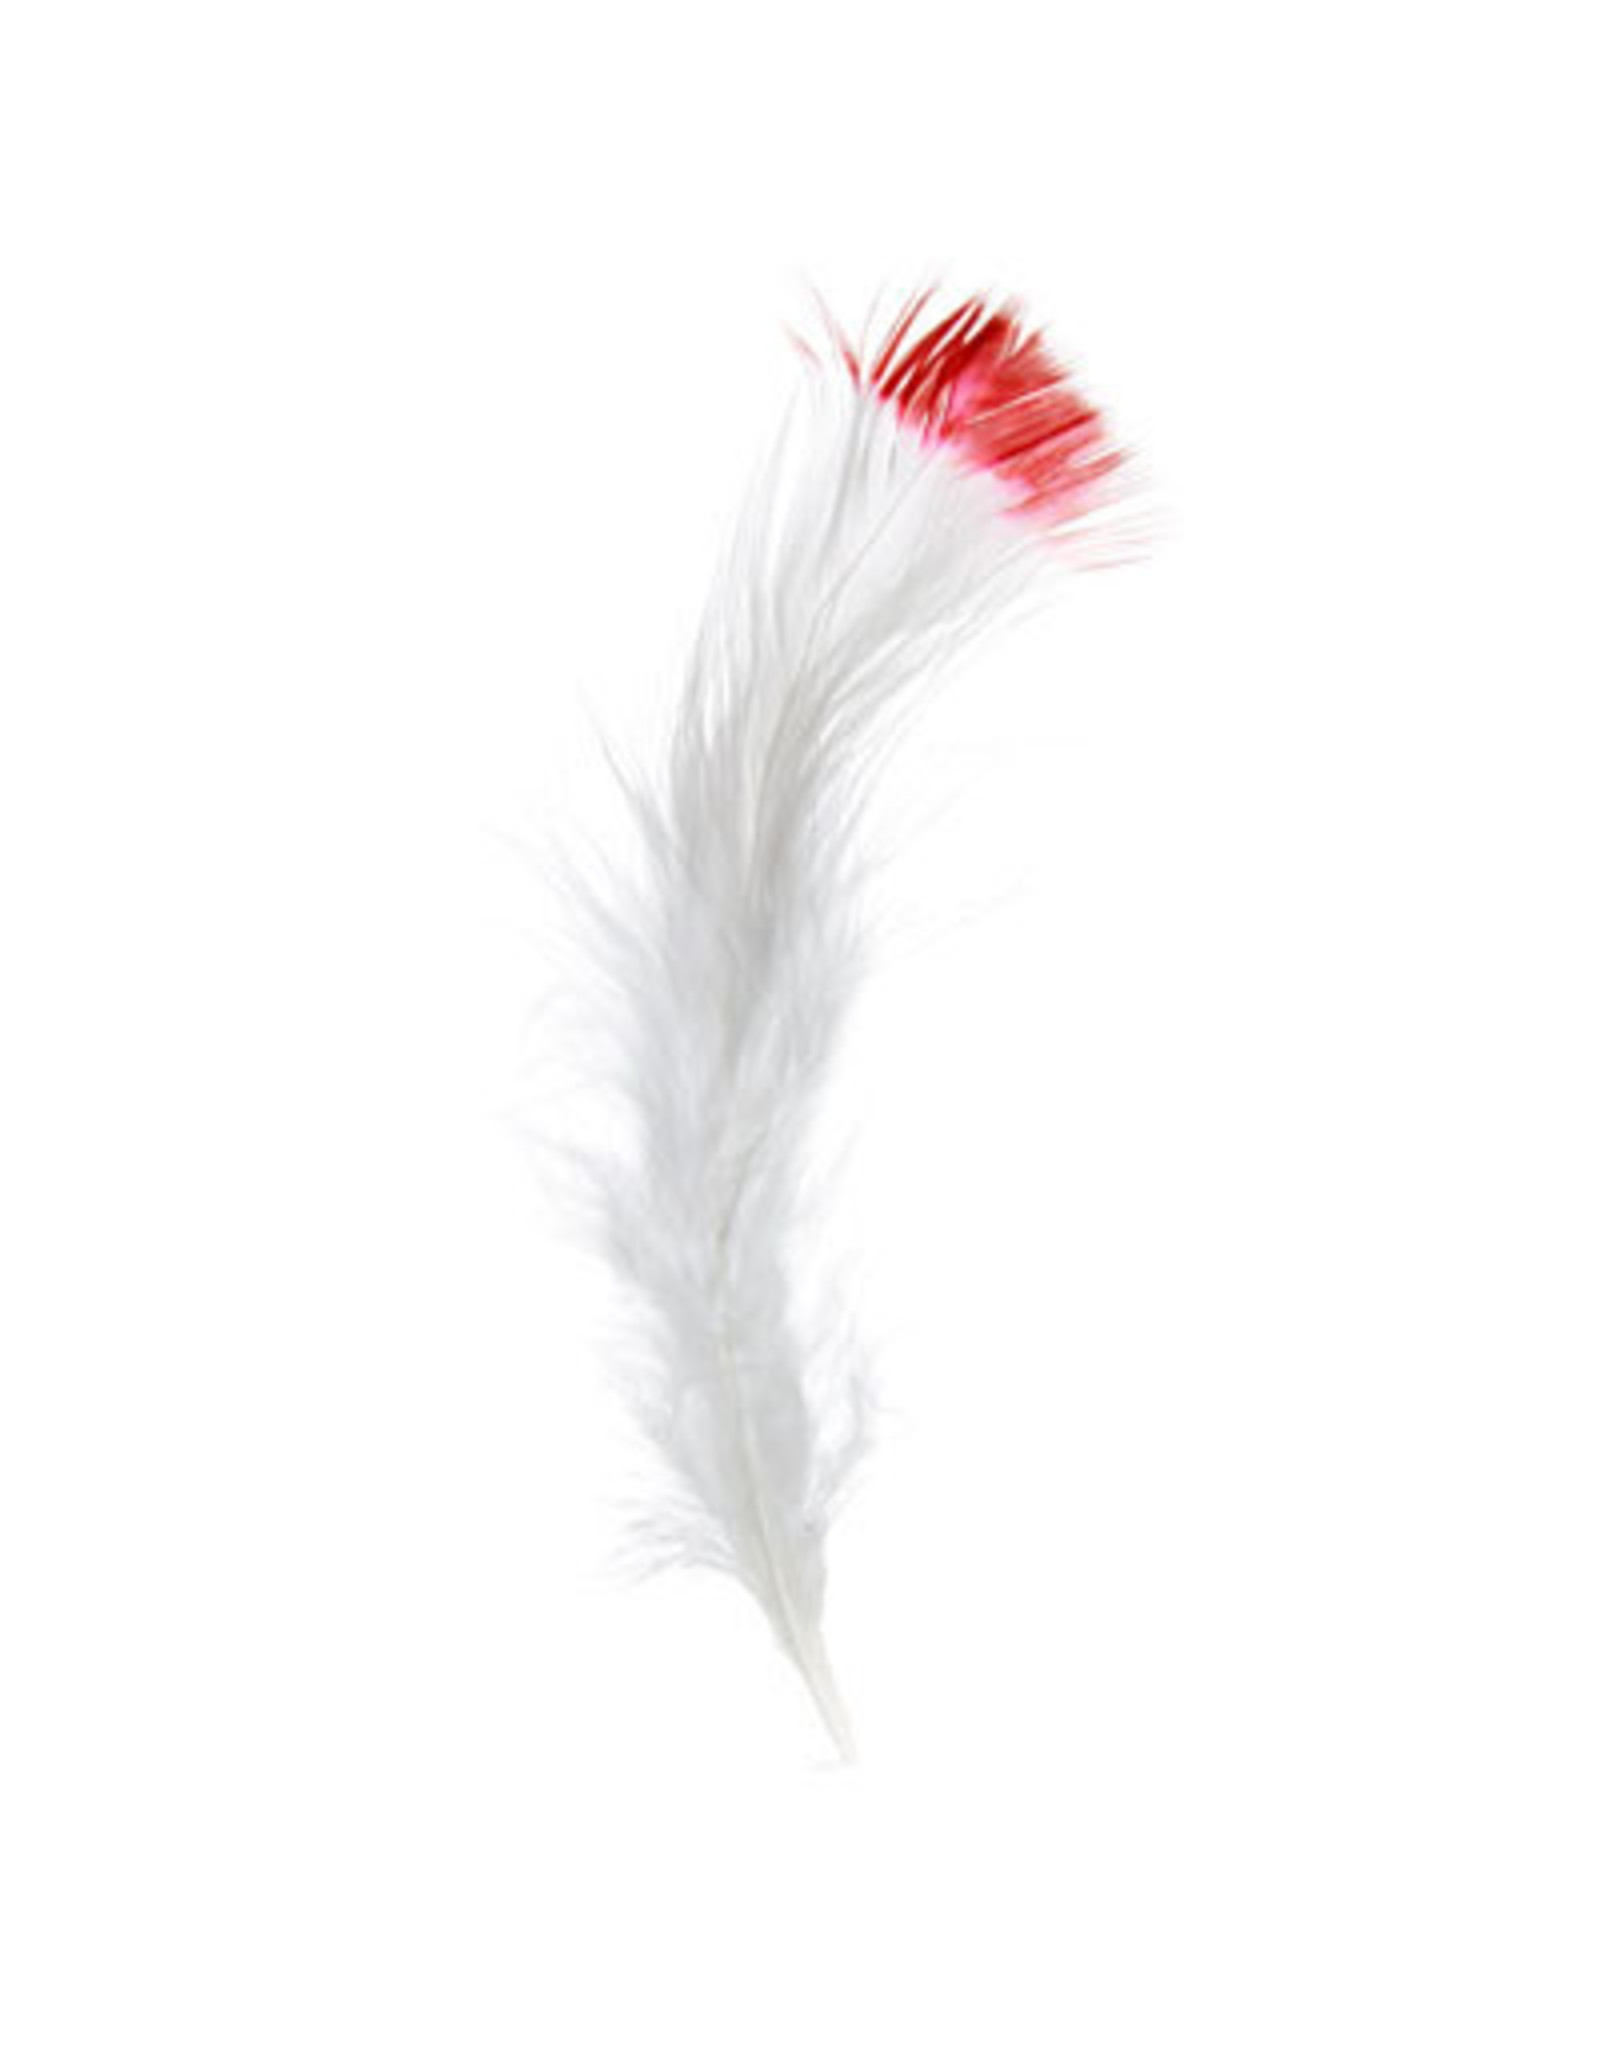 Marabou Feathers 4-6in White Red Tip  6g